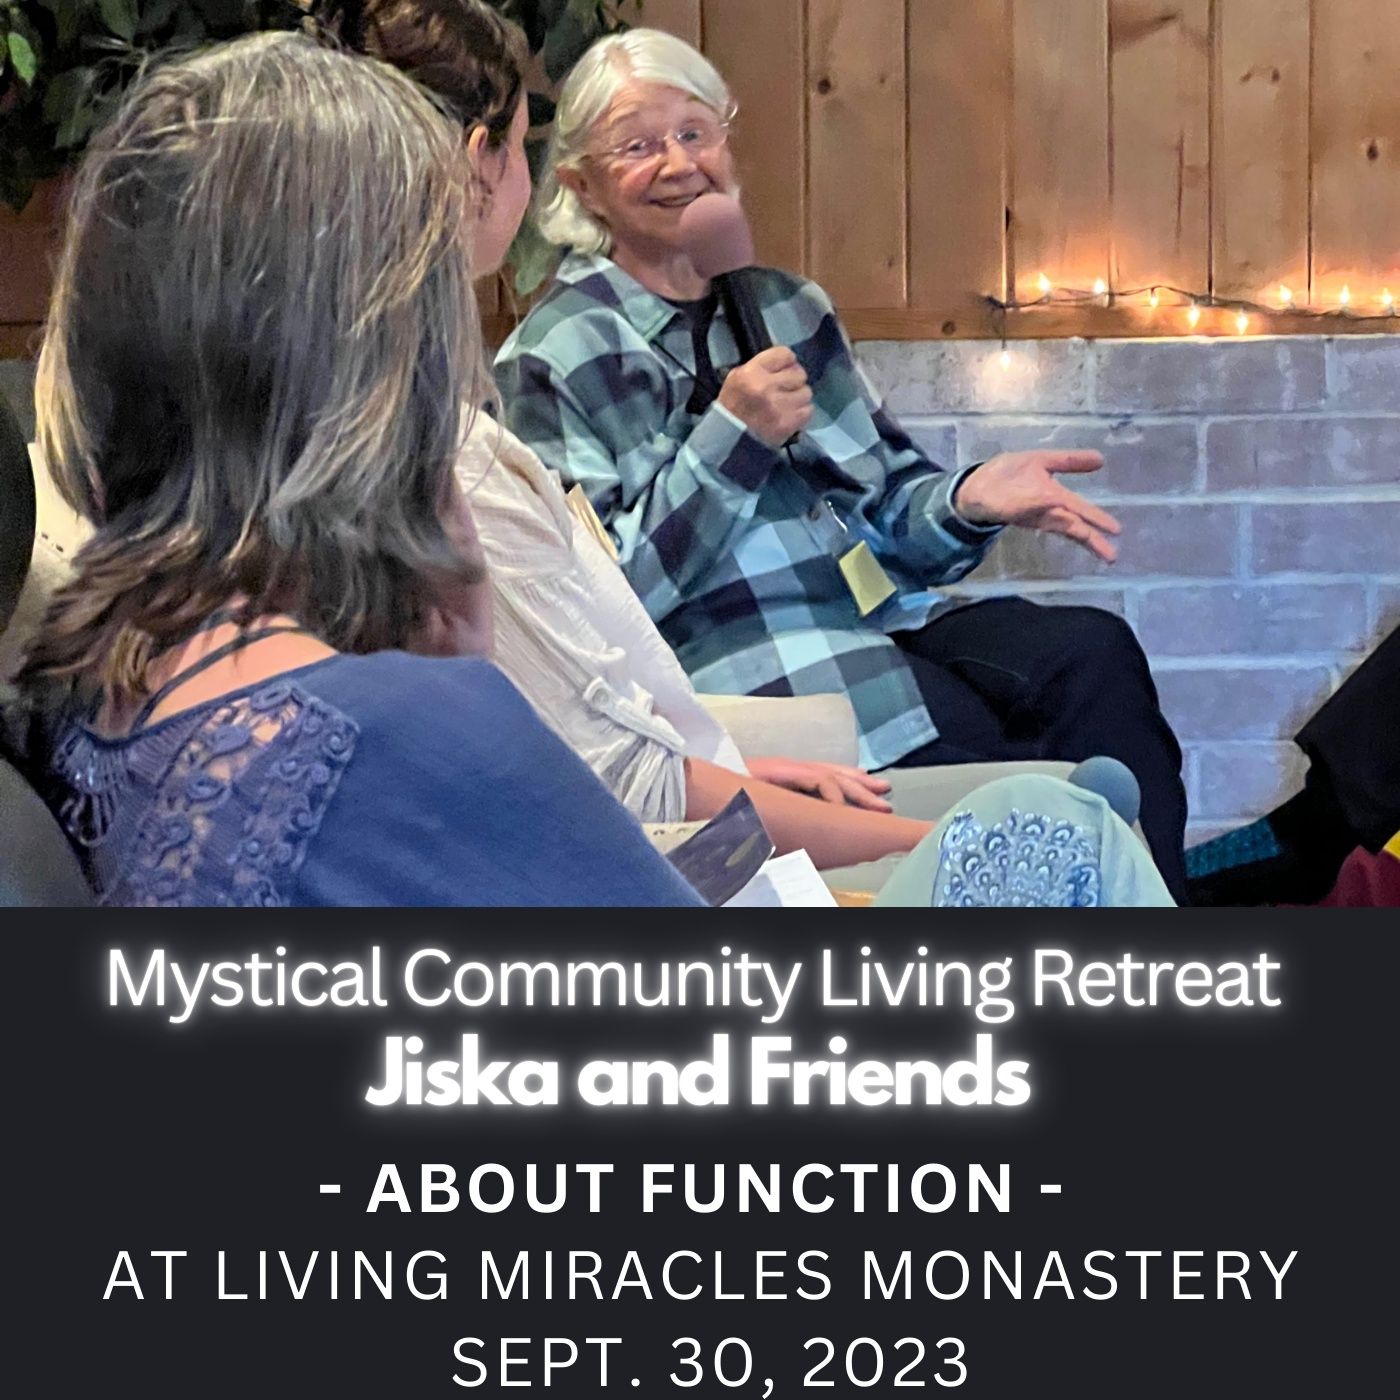 Community Function Session, Mystical Community Living Retreat with Jiska and Friends